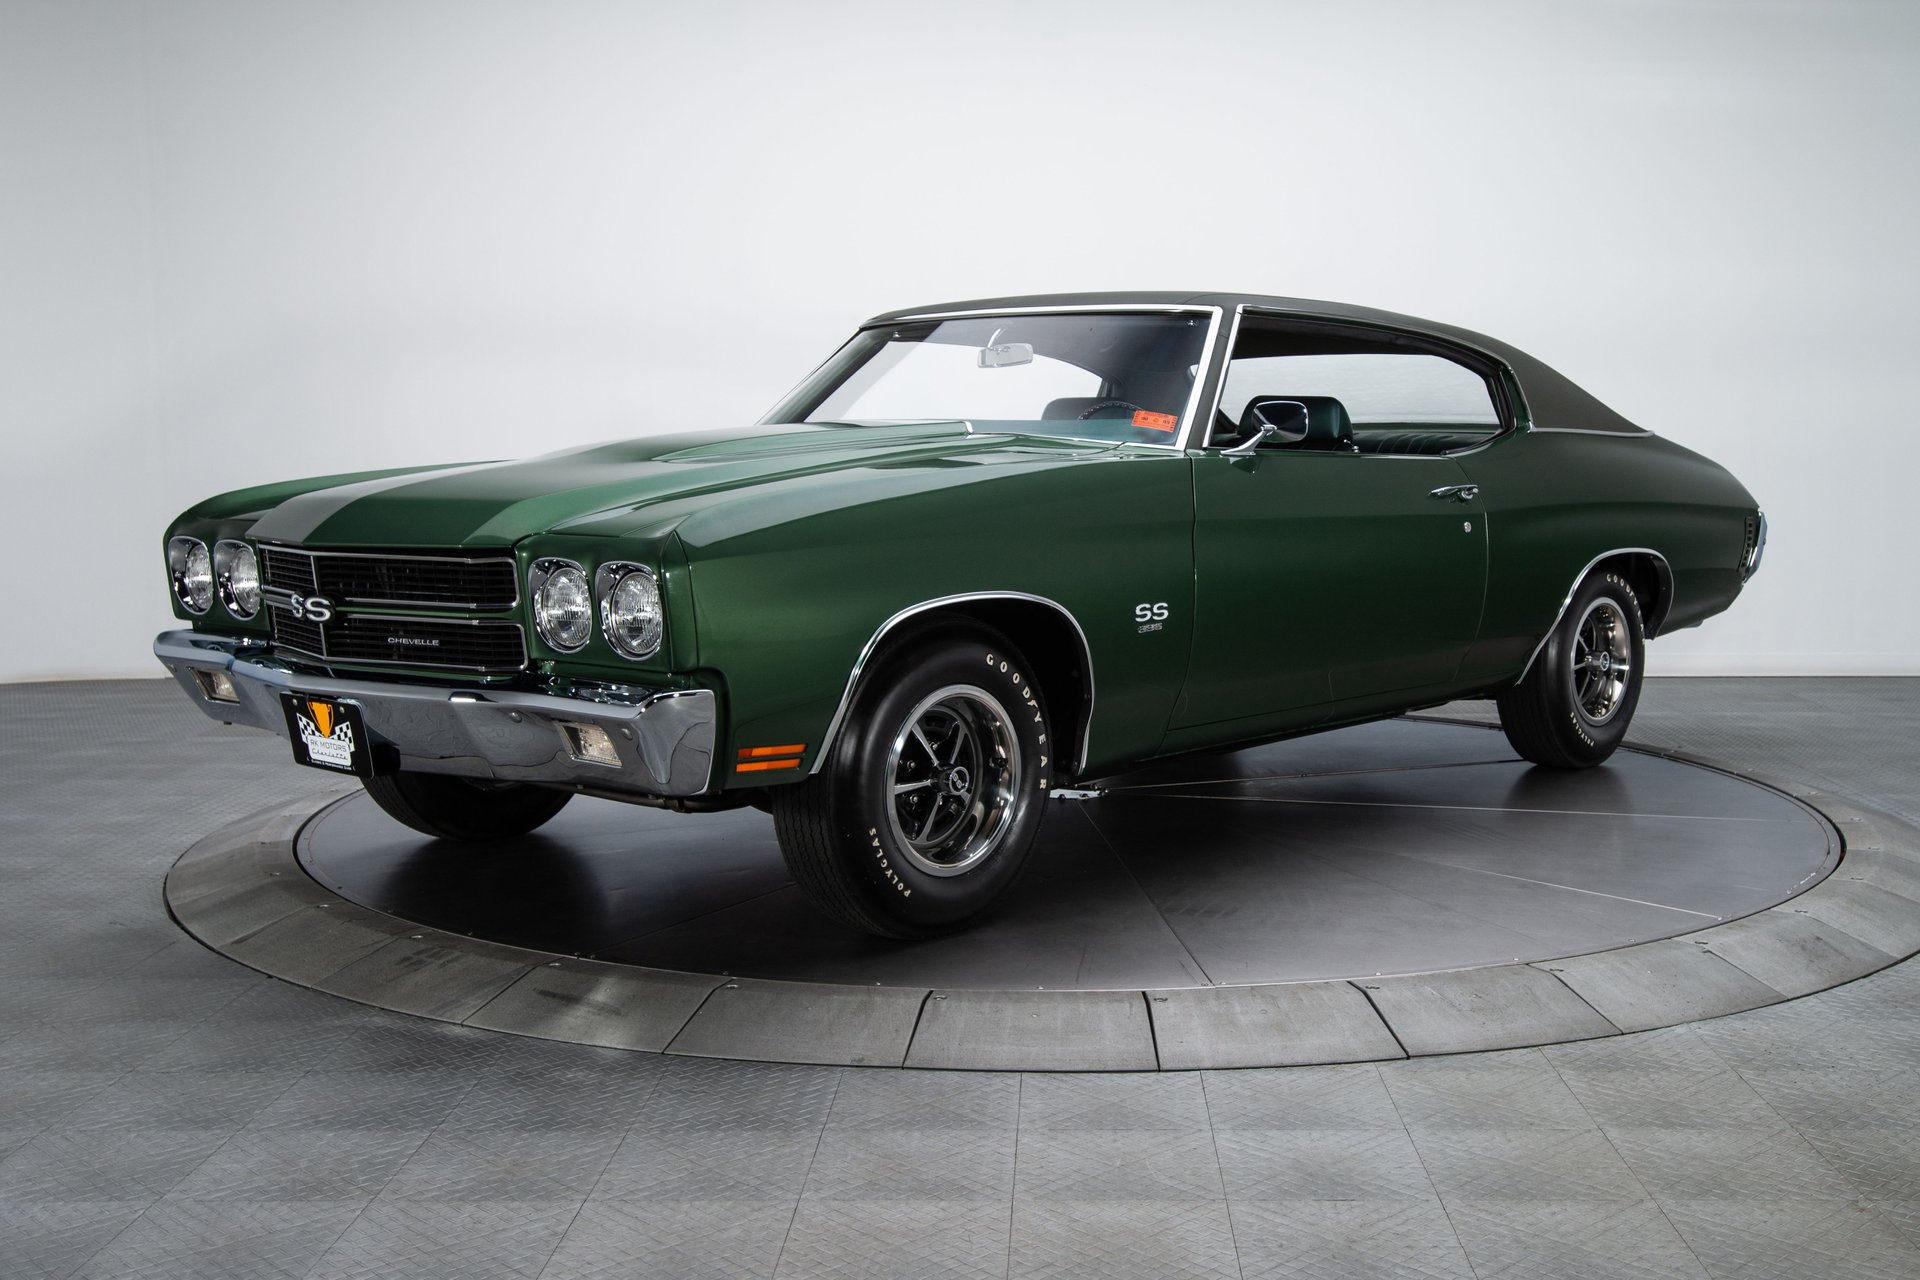 Forest Green 1970 Chevy Chevelle SS Is a Two-Owner 396 Restored to Perfecti...